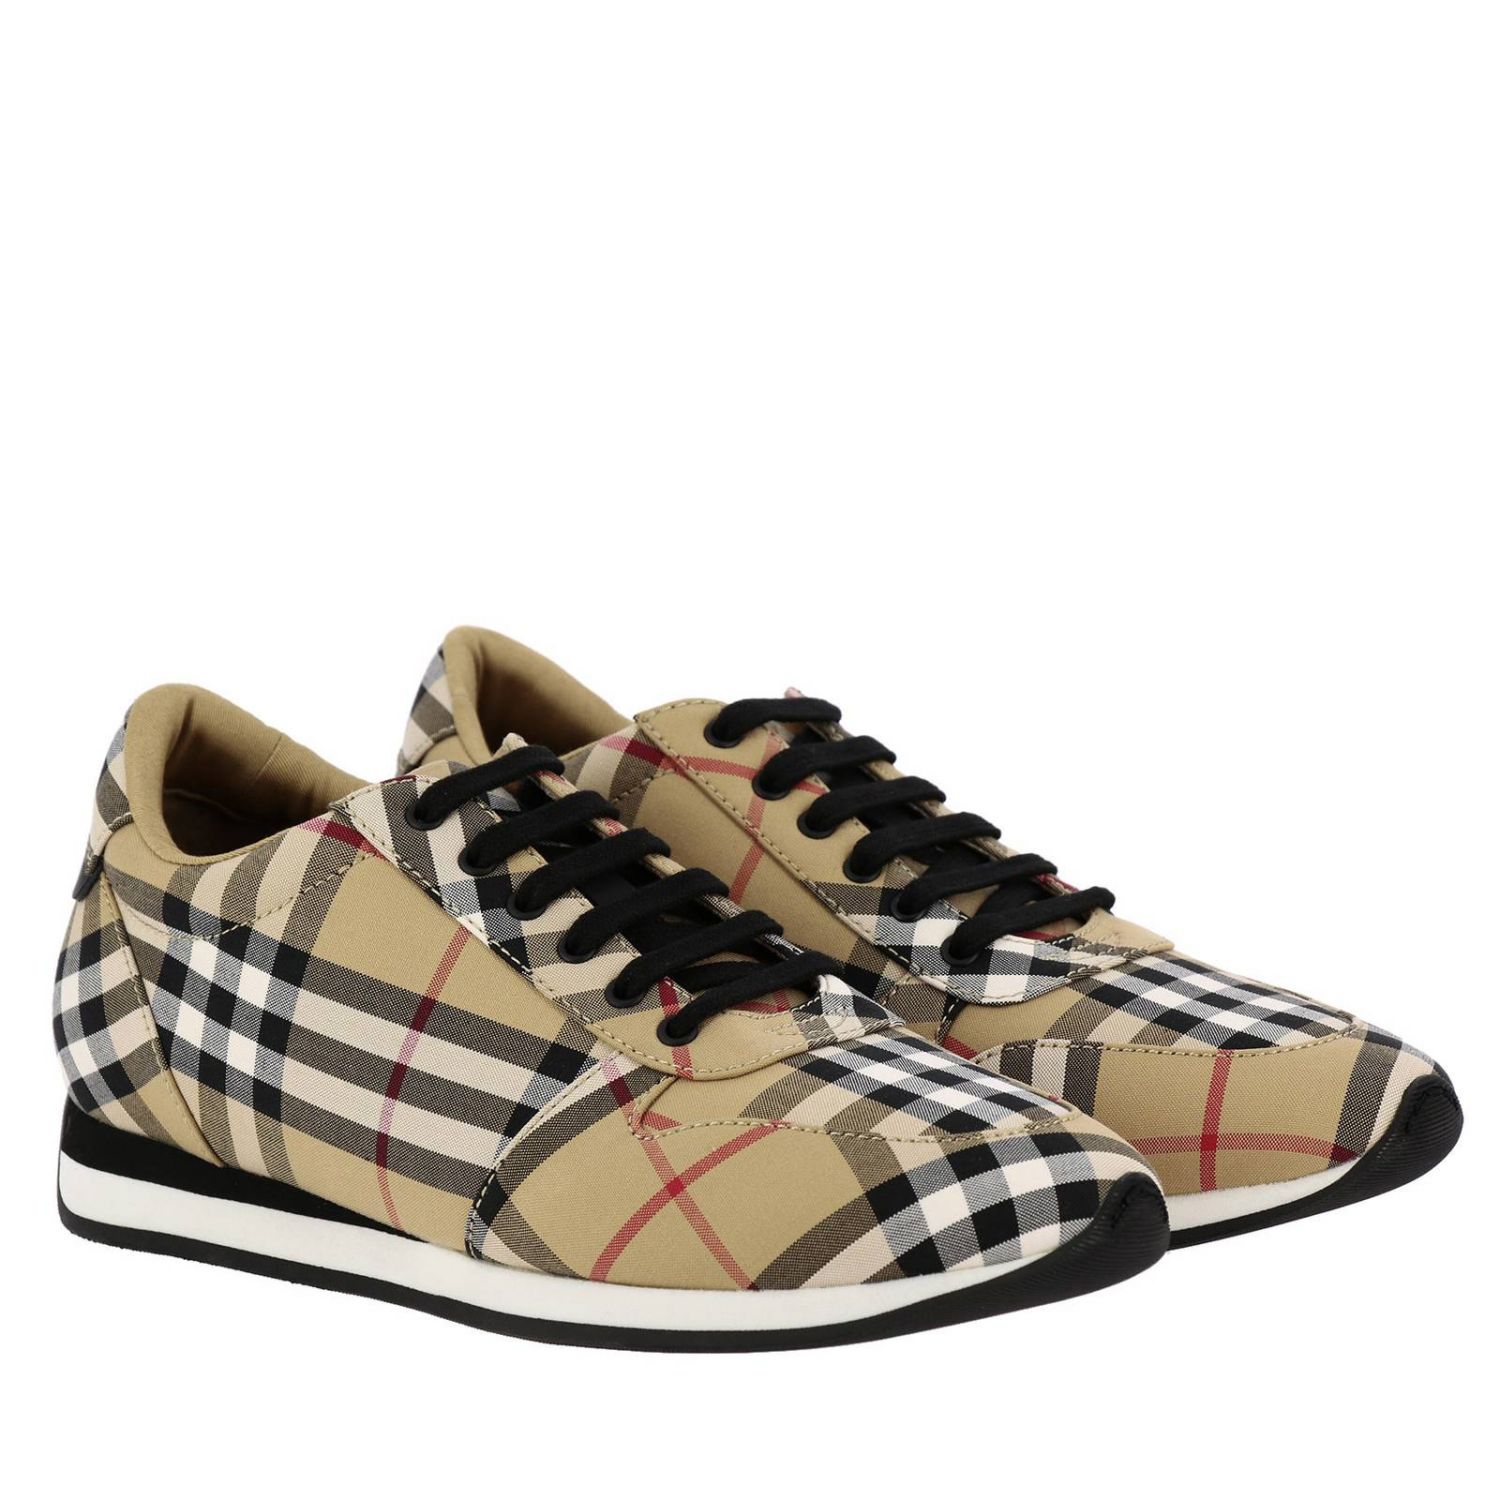 Burberry sneakers womens Amelia VC in 